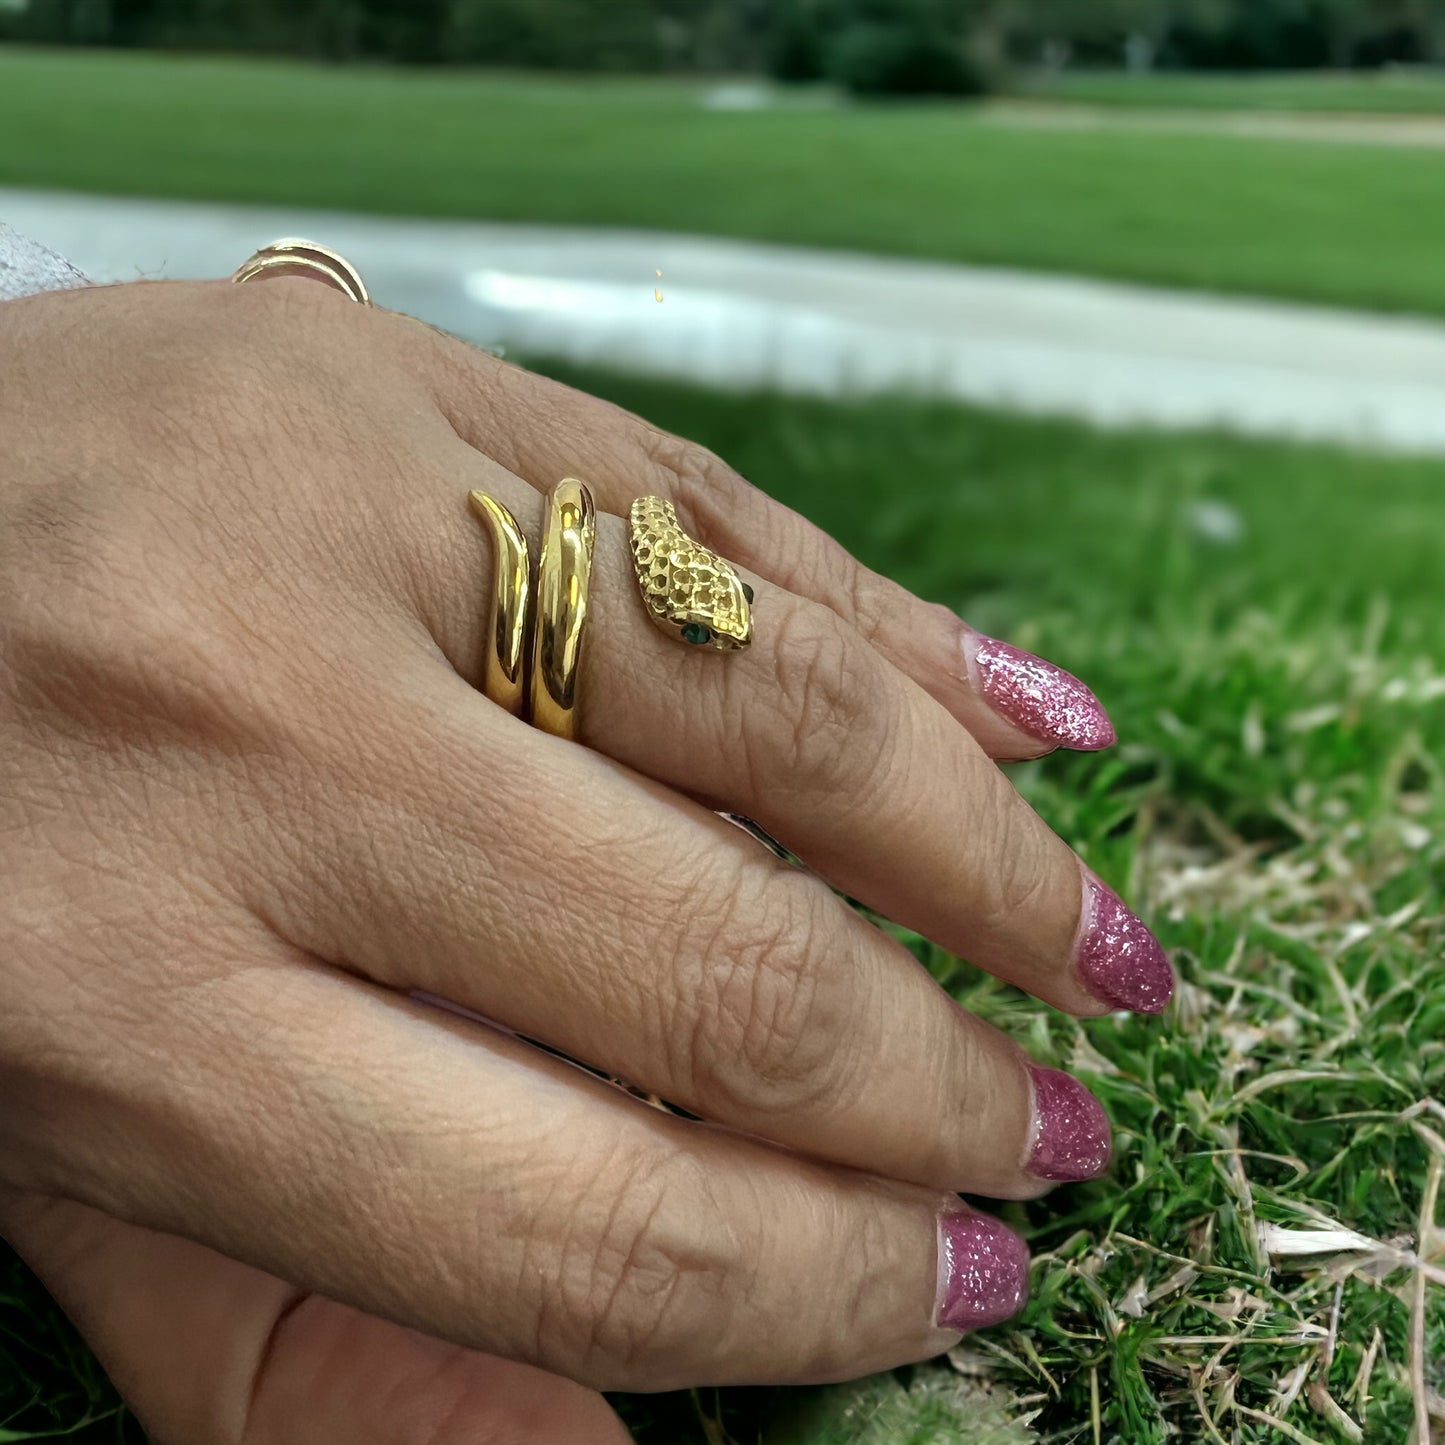 Serpentine Allure: Gold Snake Ring for Women with Captivating Green Eyes - Elevate Your Style with this Daring and Fashionable Statement Piece